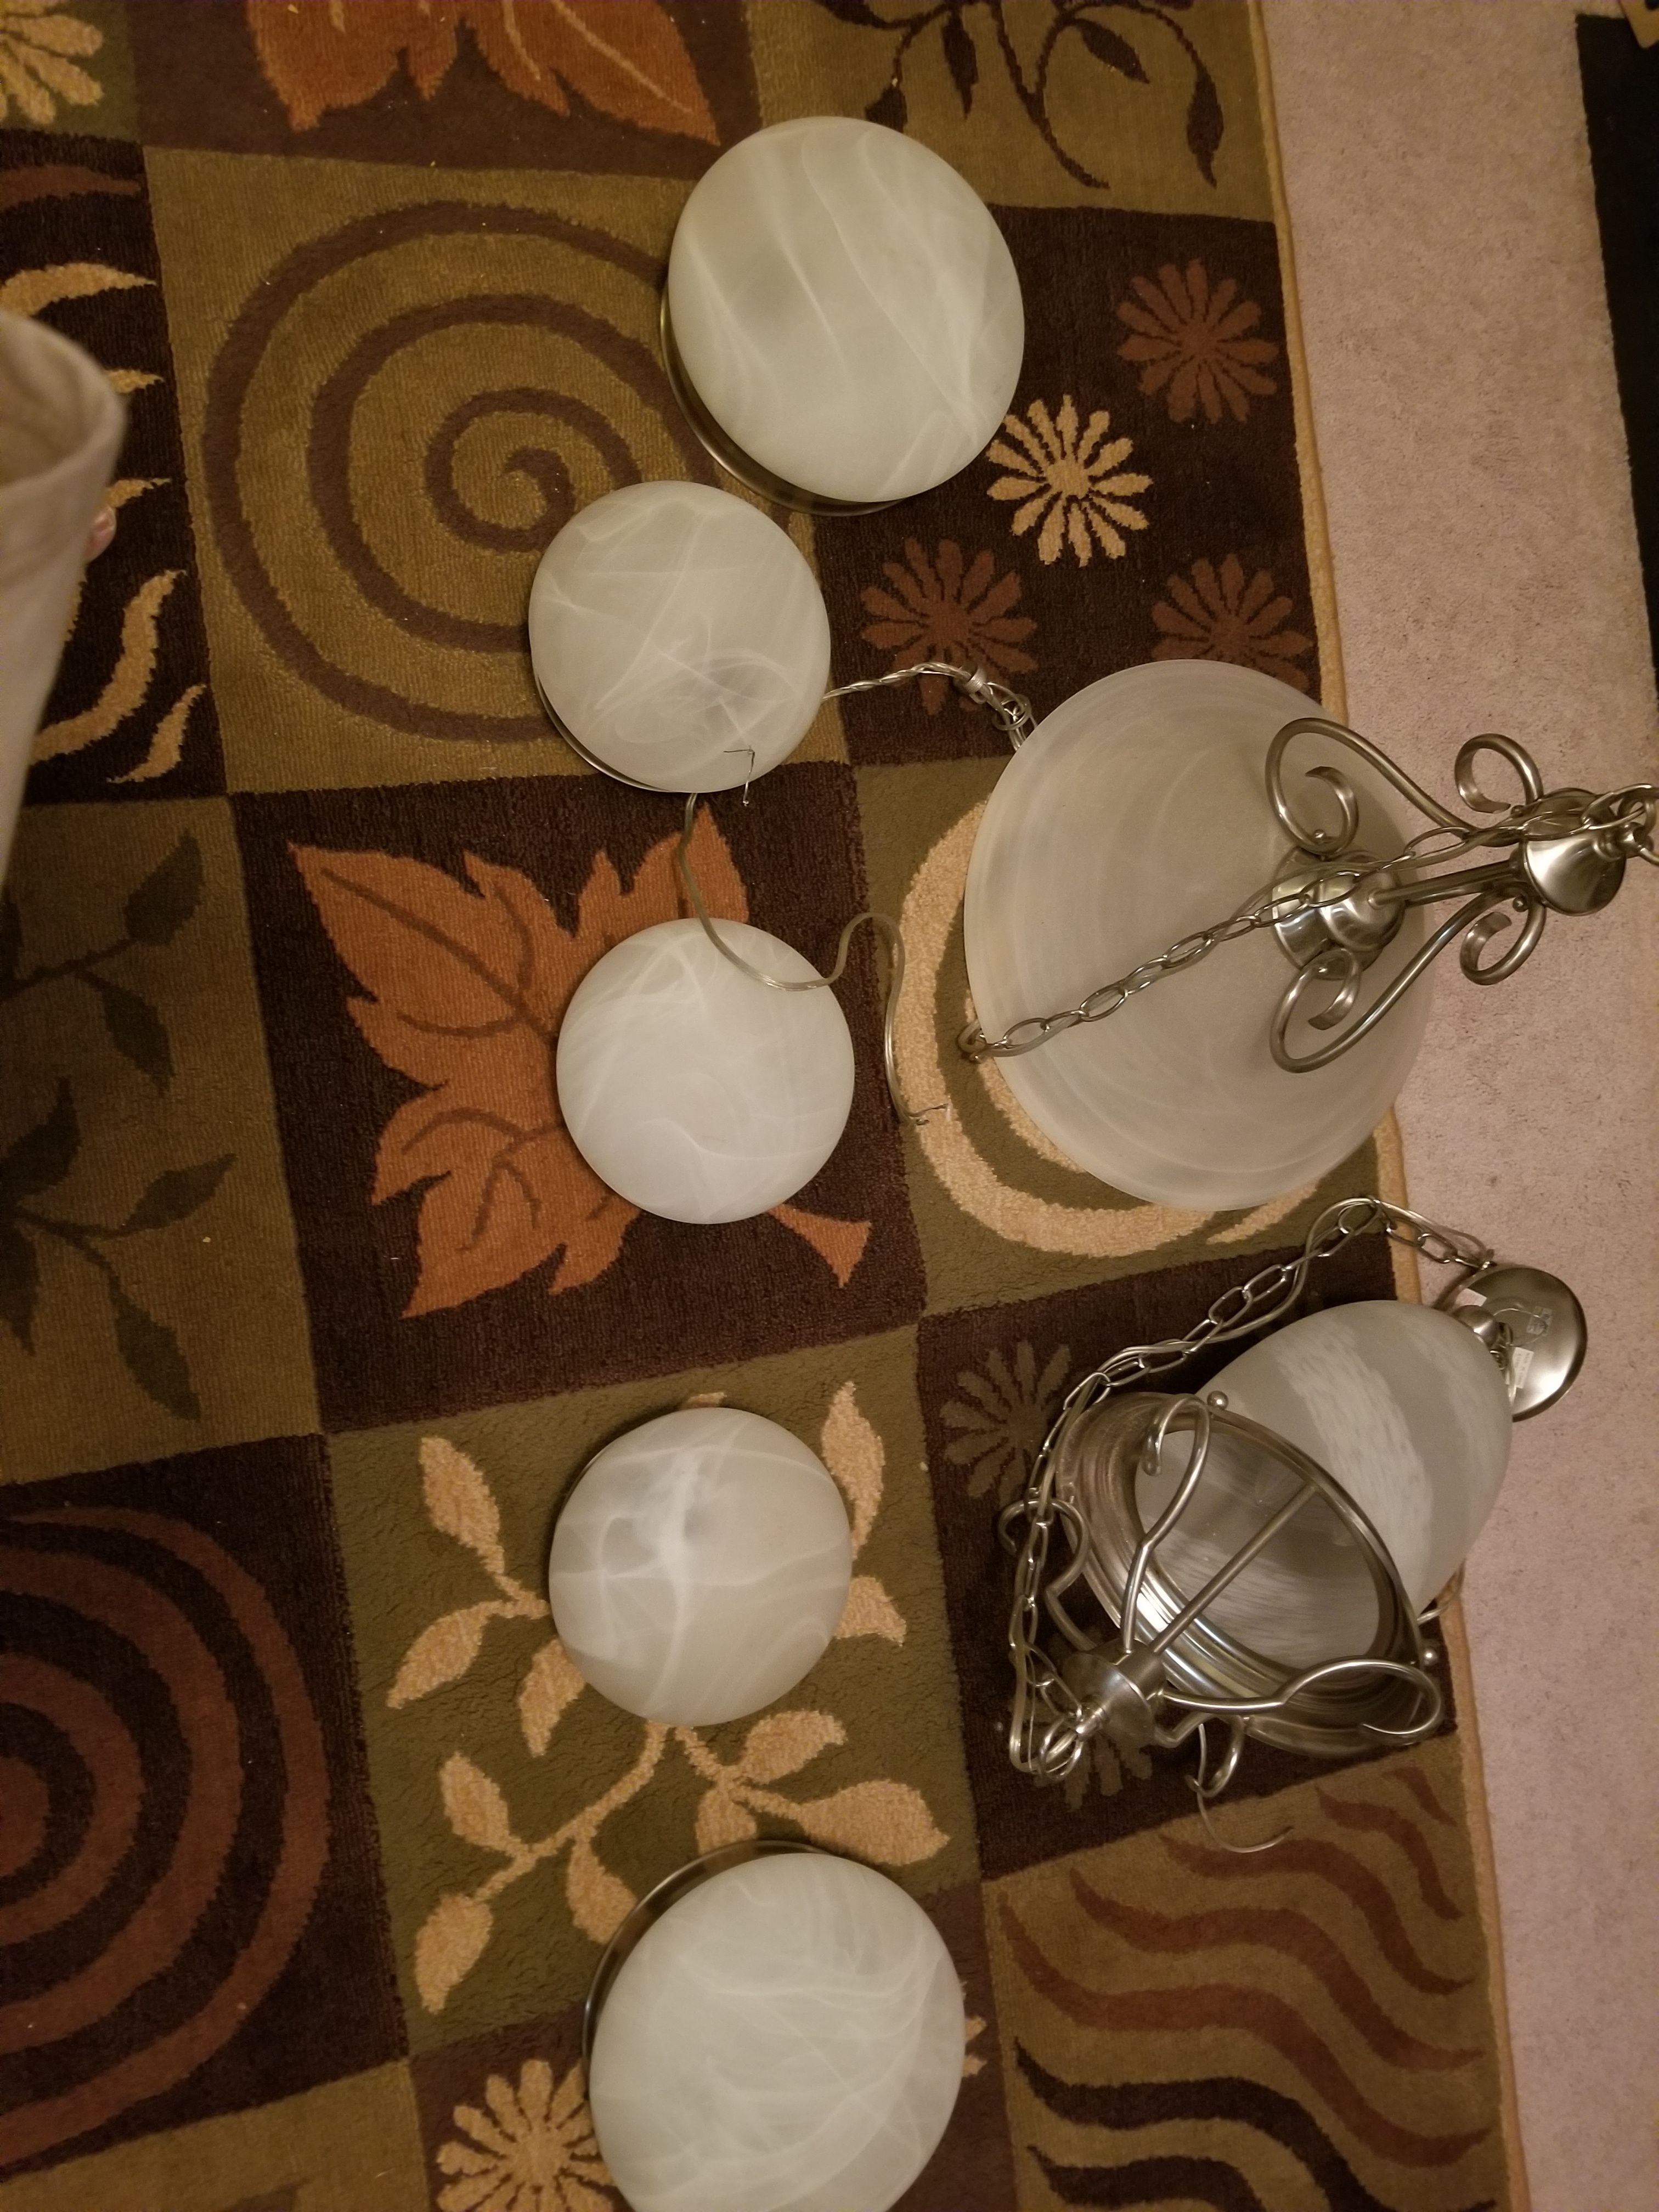 7 total Light fixtures.(2) hanging & the other 5 include 2 large and 3 smaller ones. Price negotiable.